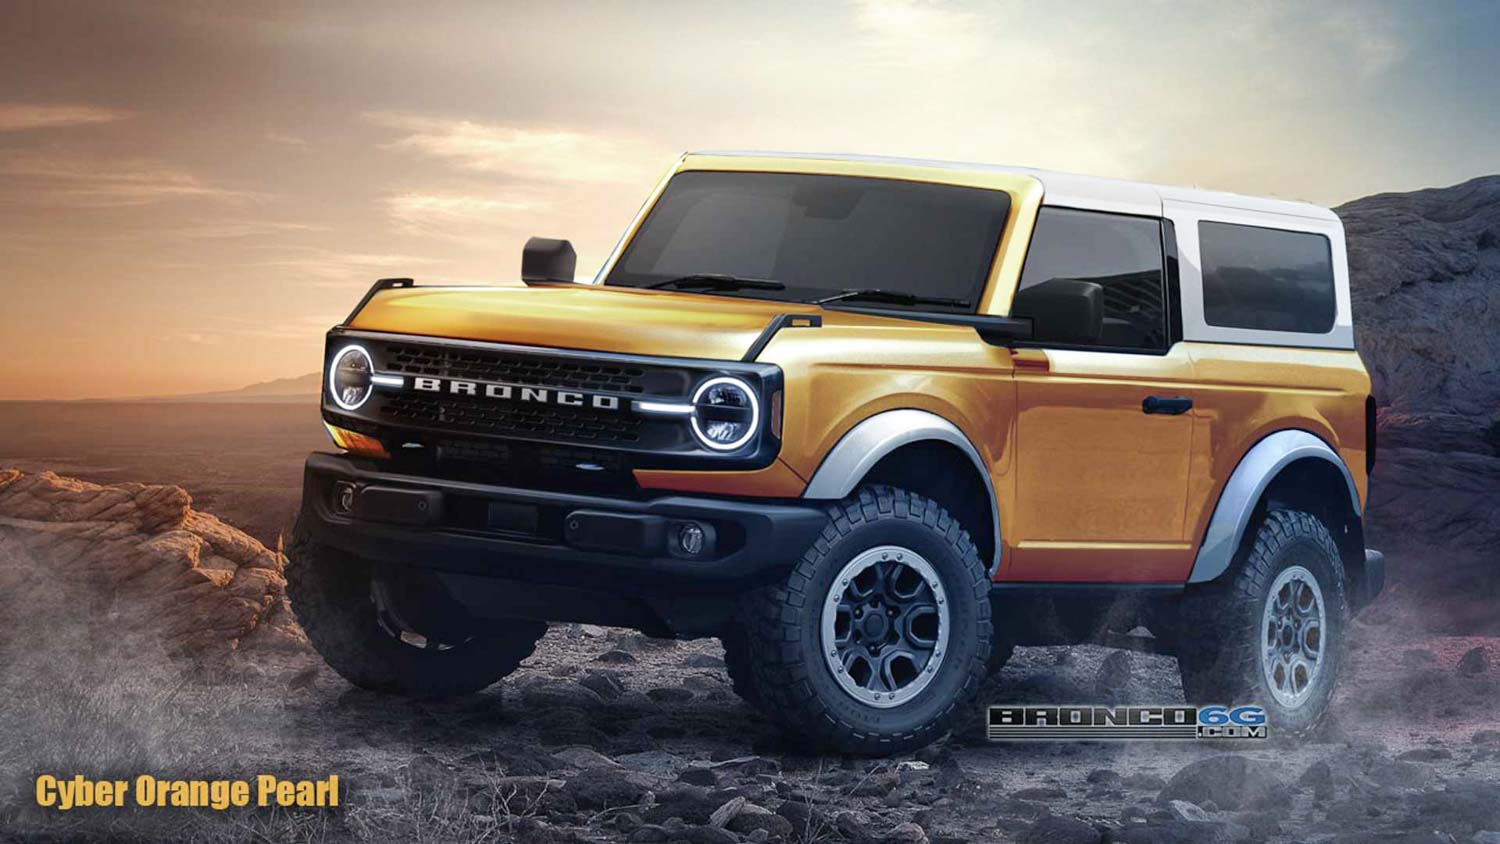 2021 Ford Bronco Rendered Stylishly In Both 2- And 4-Door ...